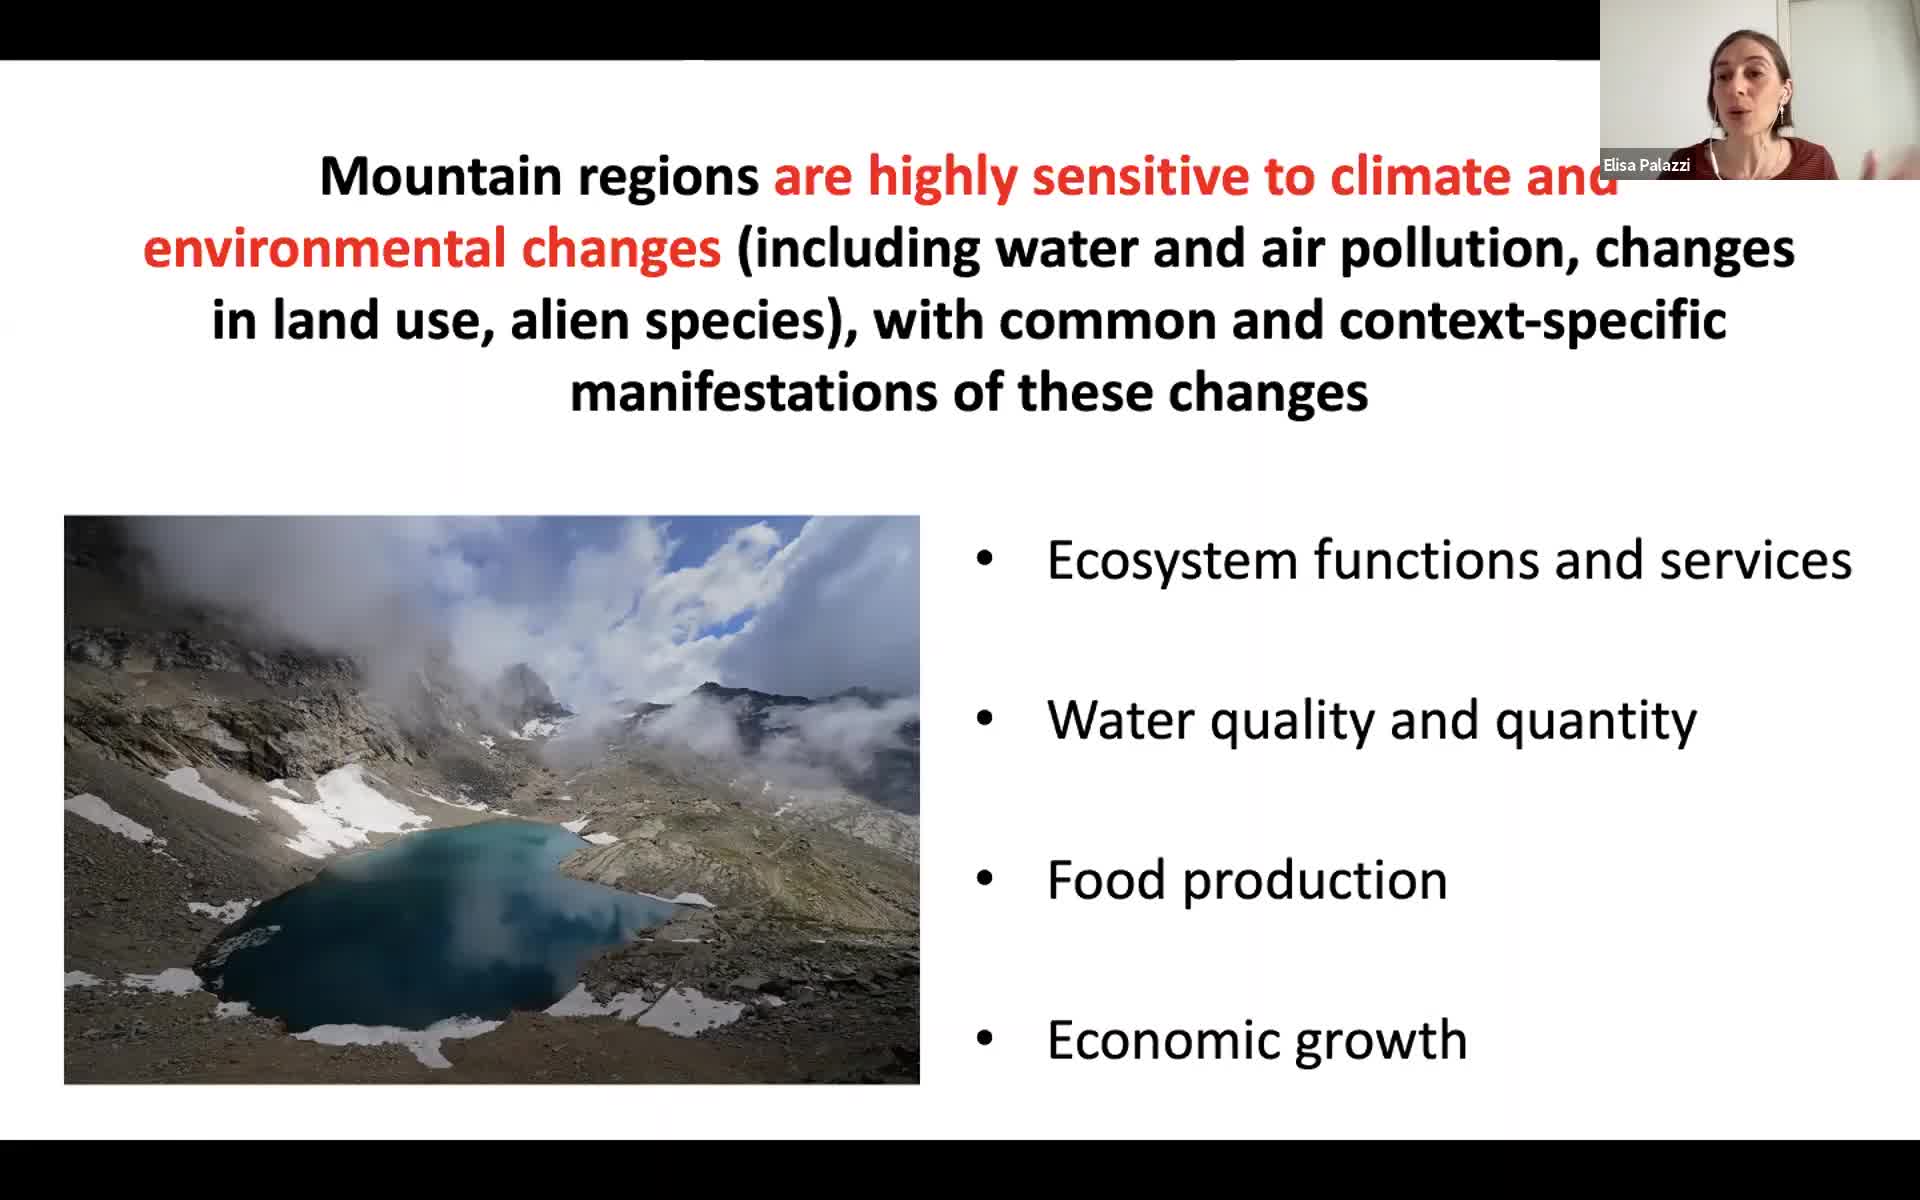 S2-Elevation dependent warming and climate change in the mountains: strengths and uncertainties